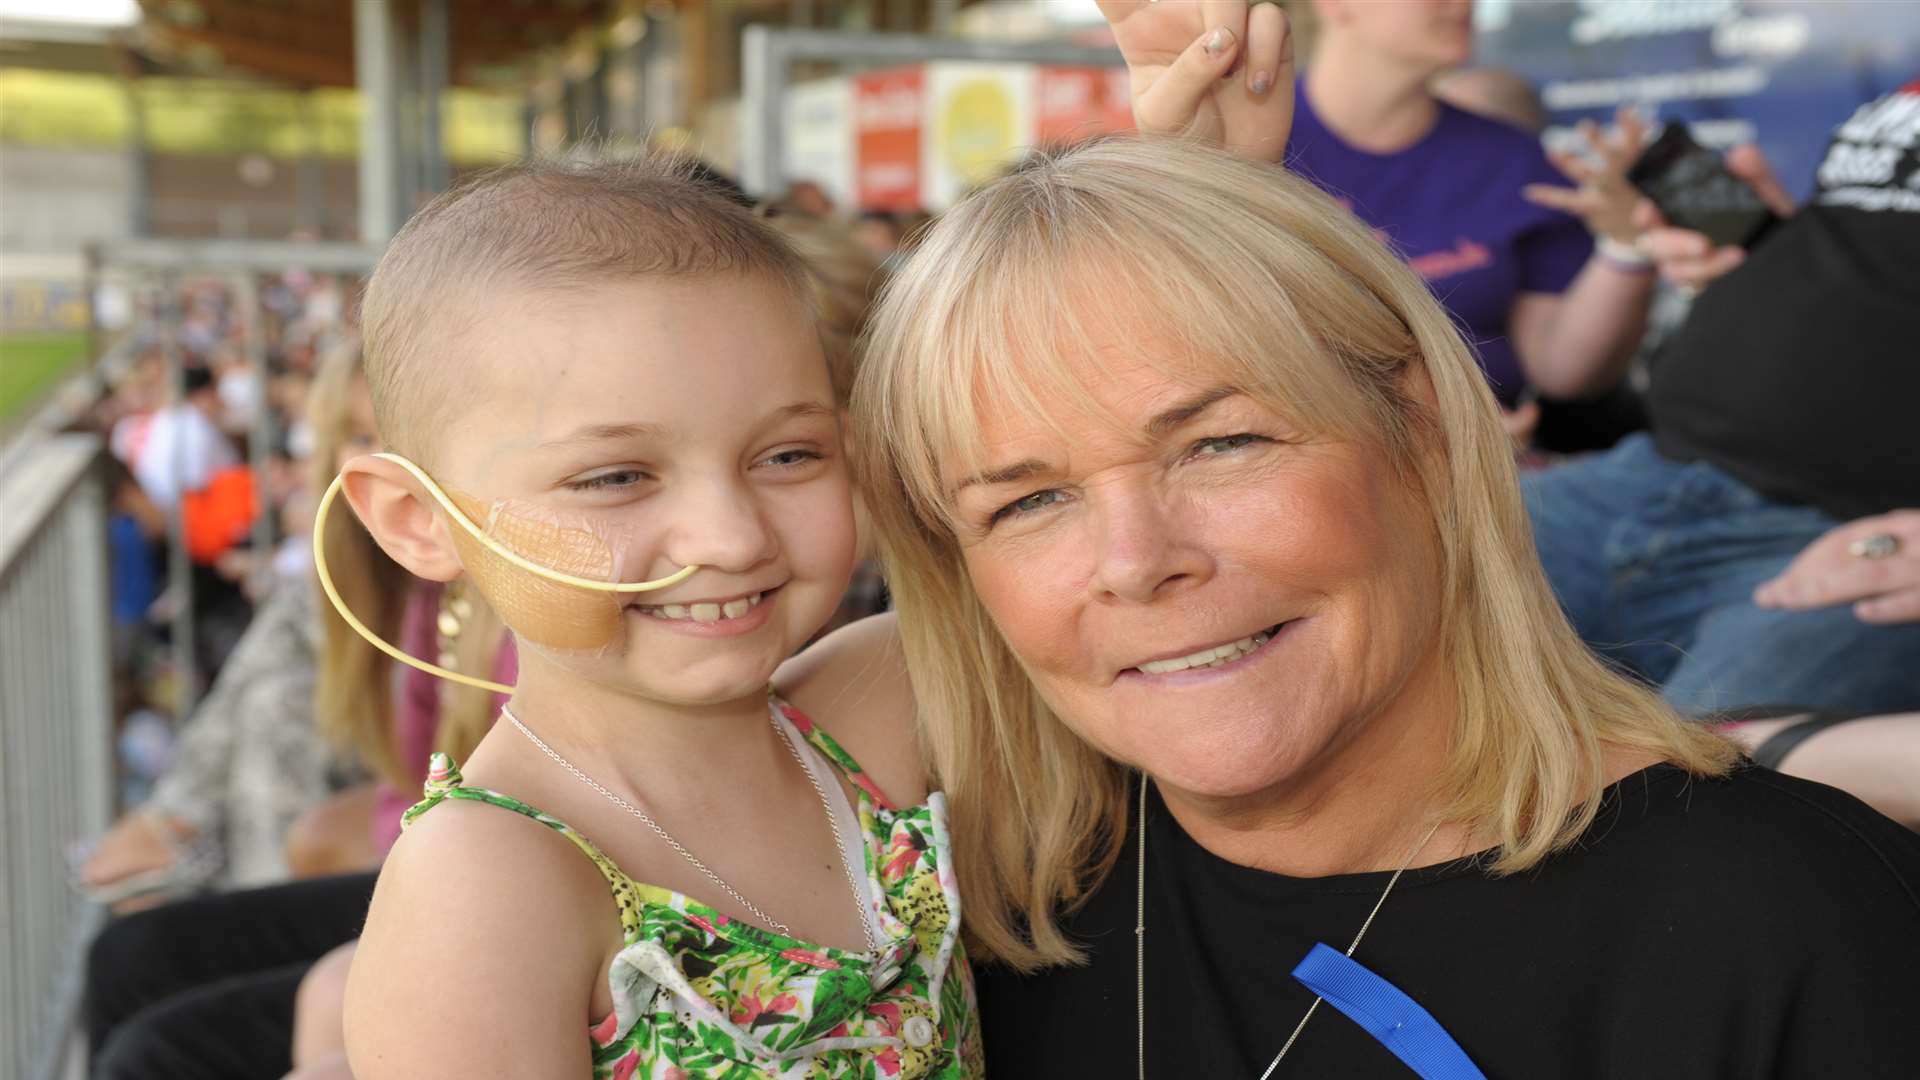 Stacey and actress Linda Robson at a charity football match in July 2014